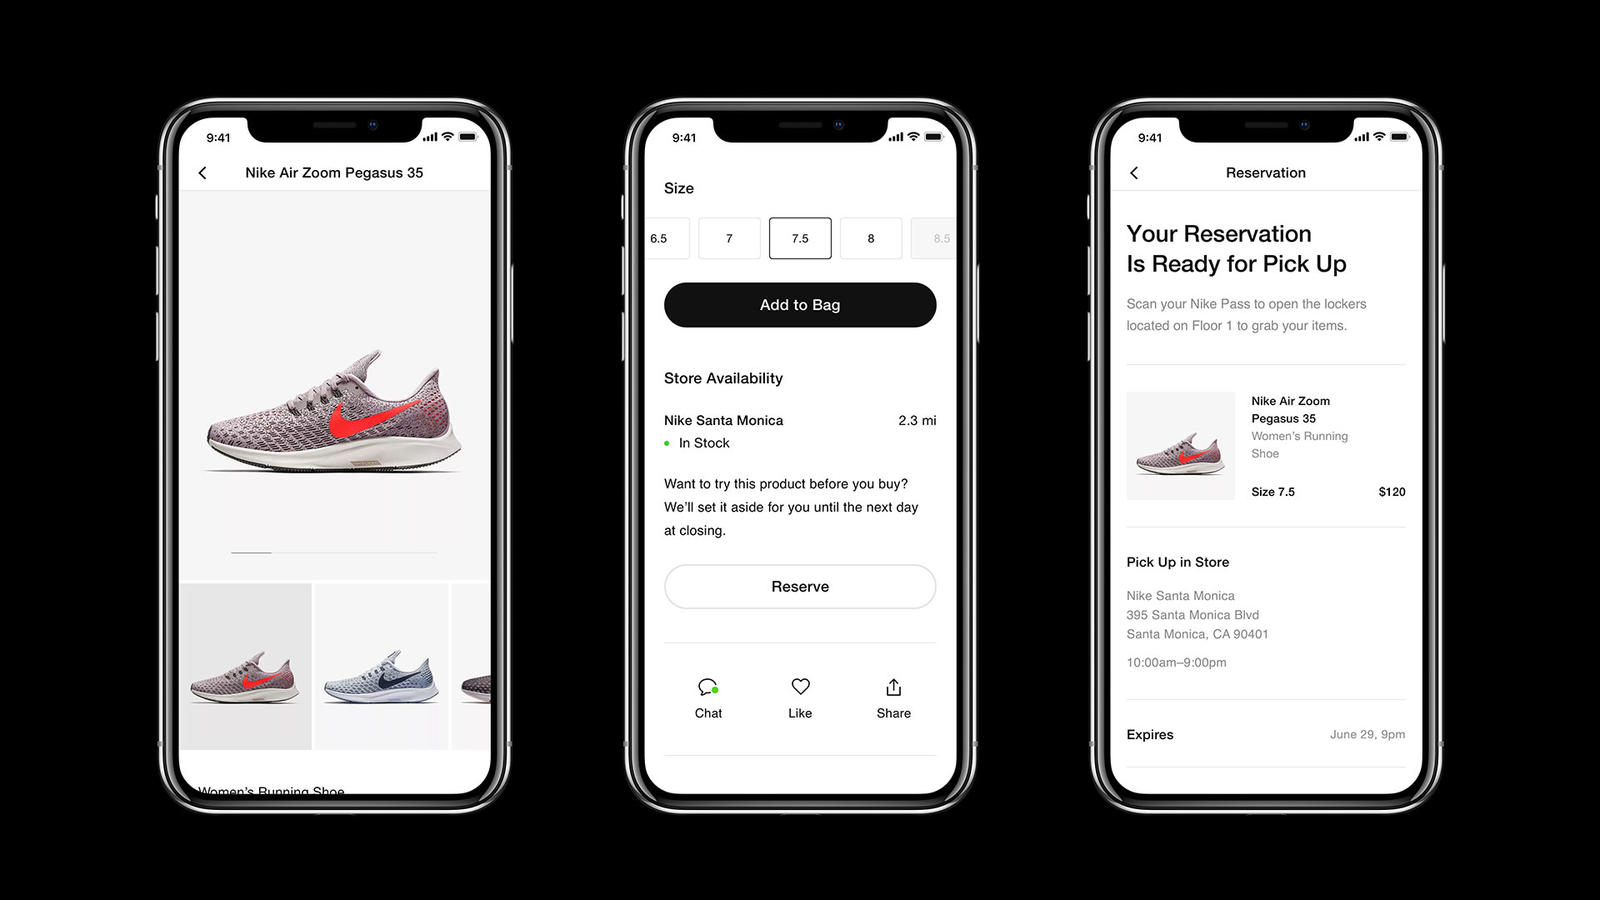 Nike App has a built-in intelligent reservation system based on previous purchases